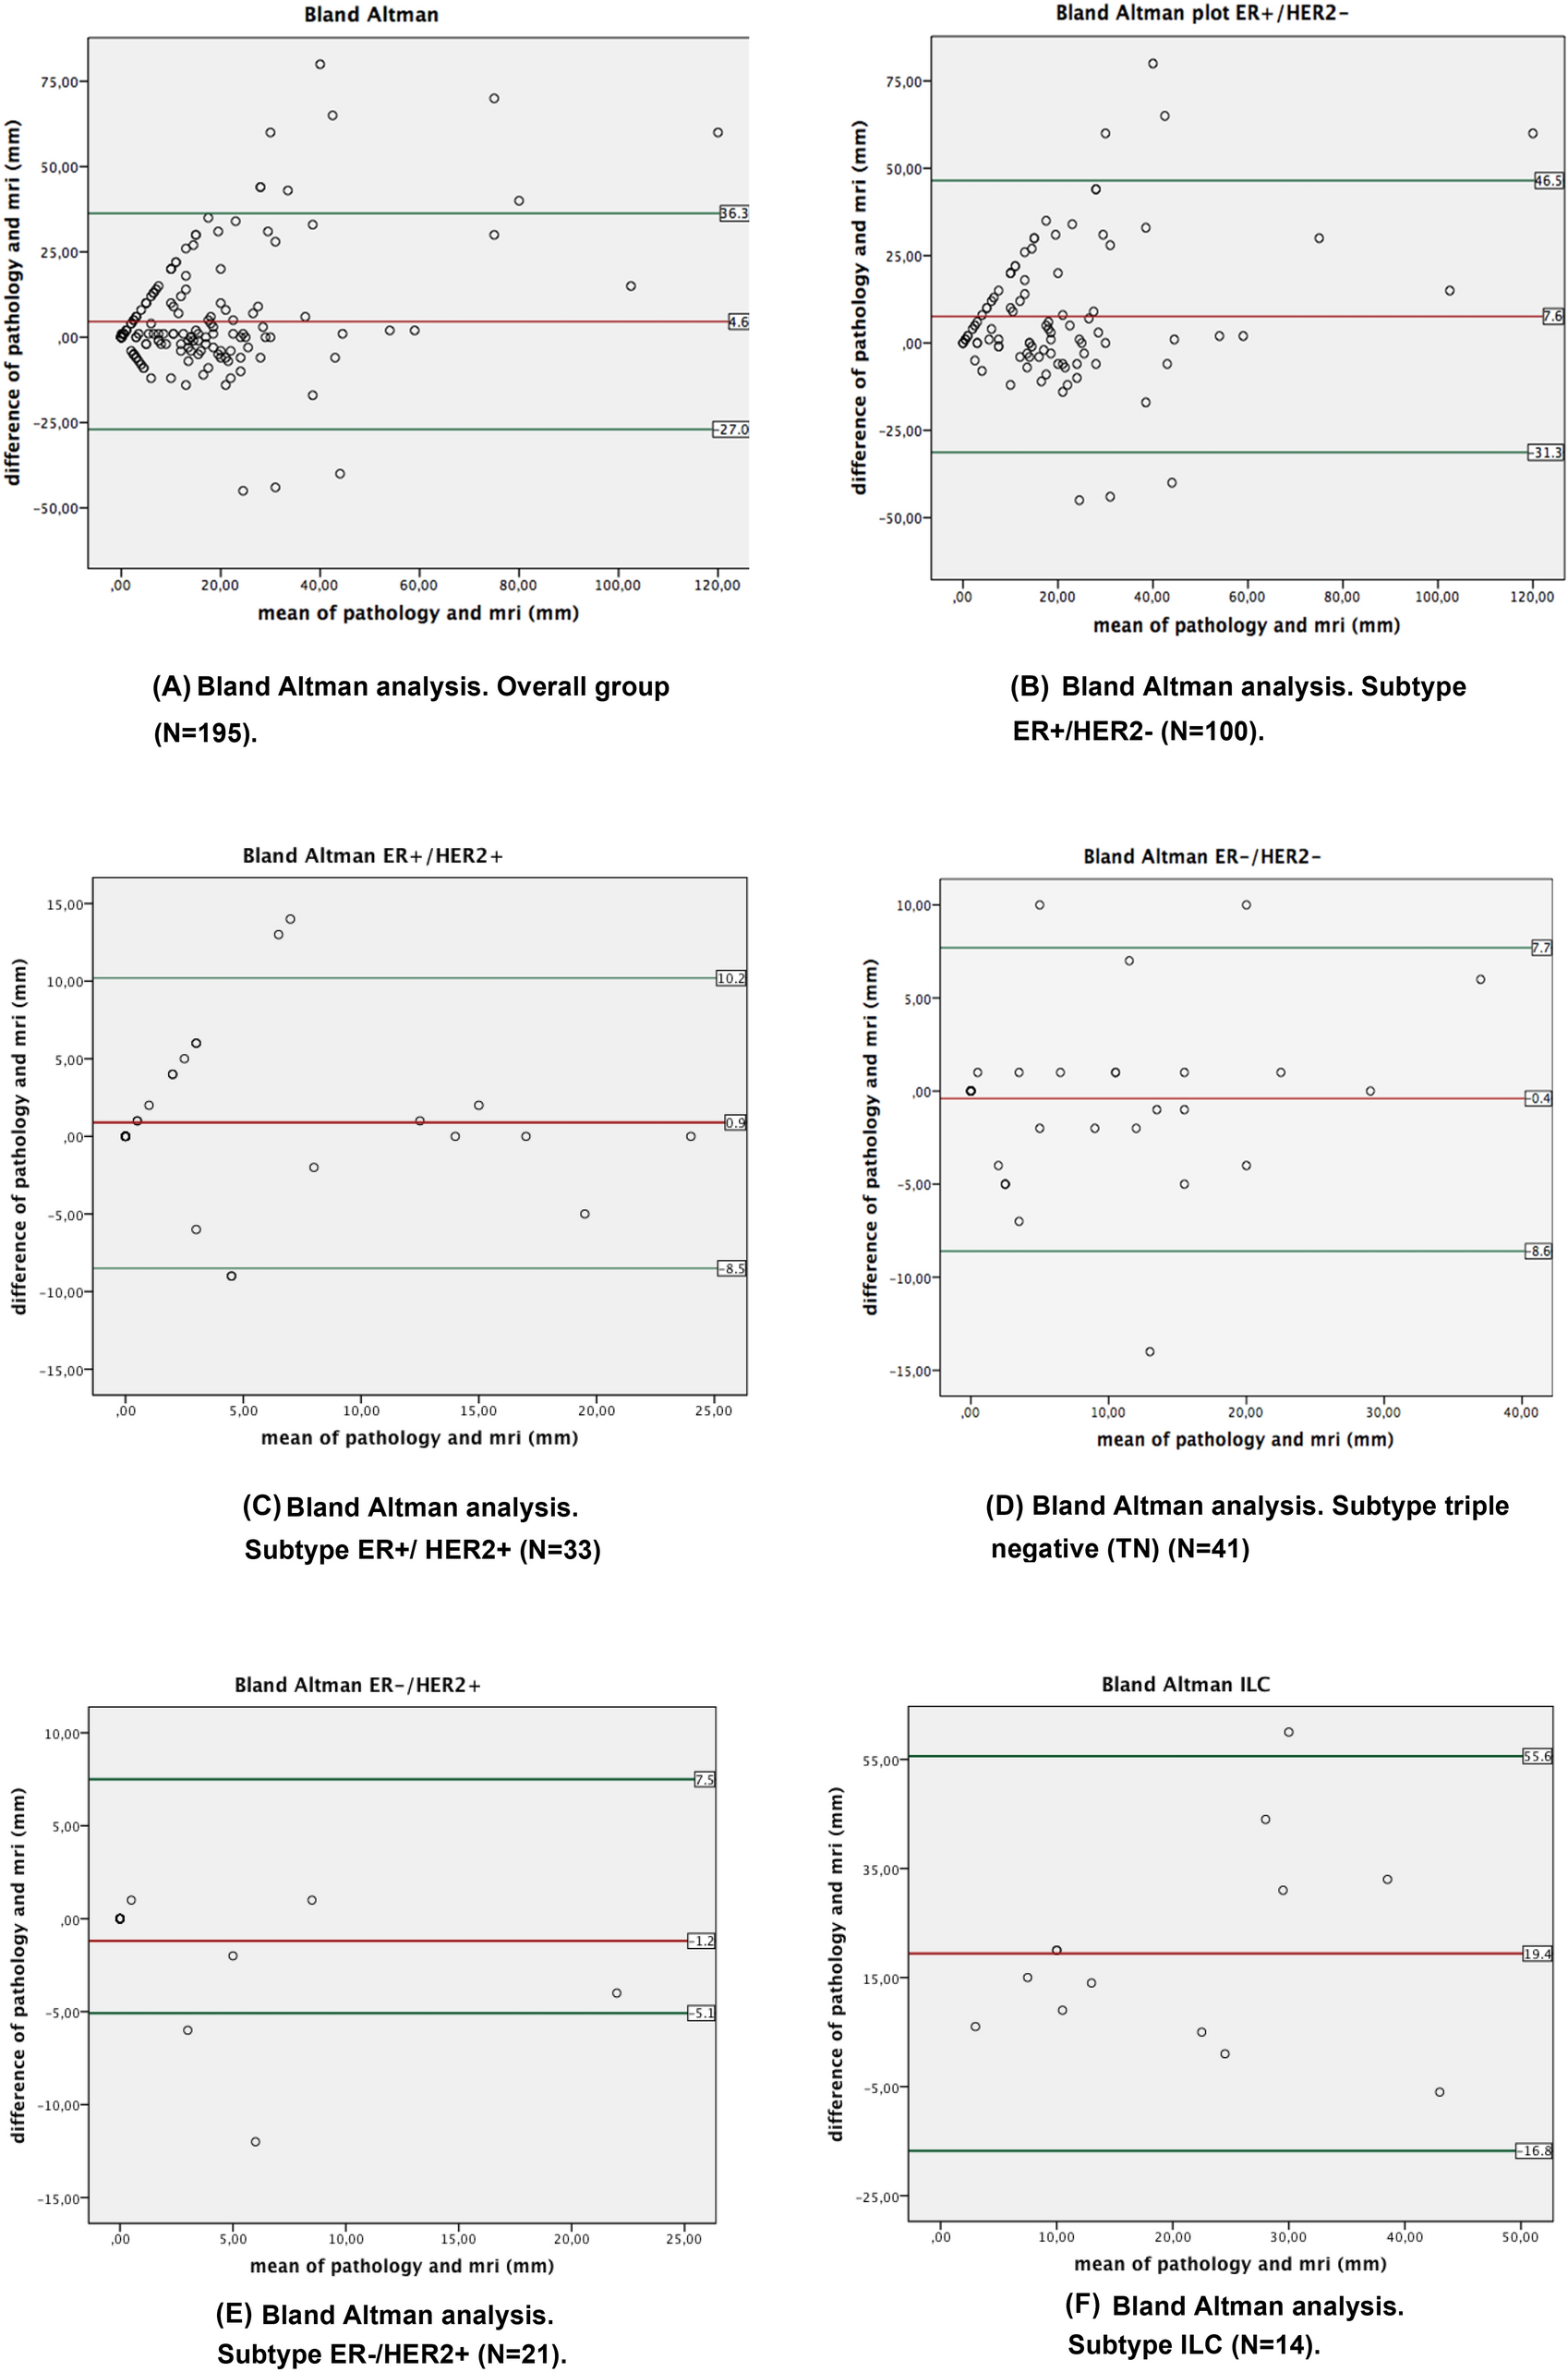 Optimizing surgical strategy in locally advanced breast cancer: a comparative analysis between preoperative MRI and postoperative pathology after neoadjuvant chemotherapy